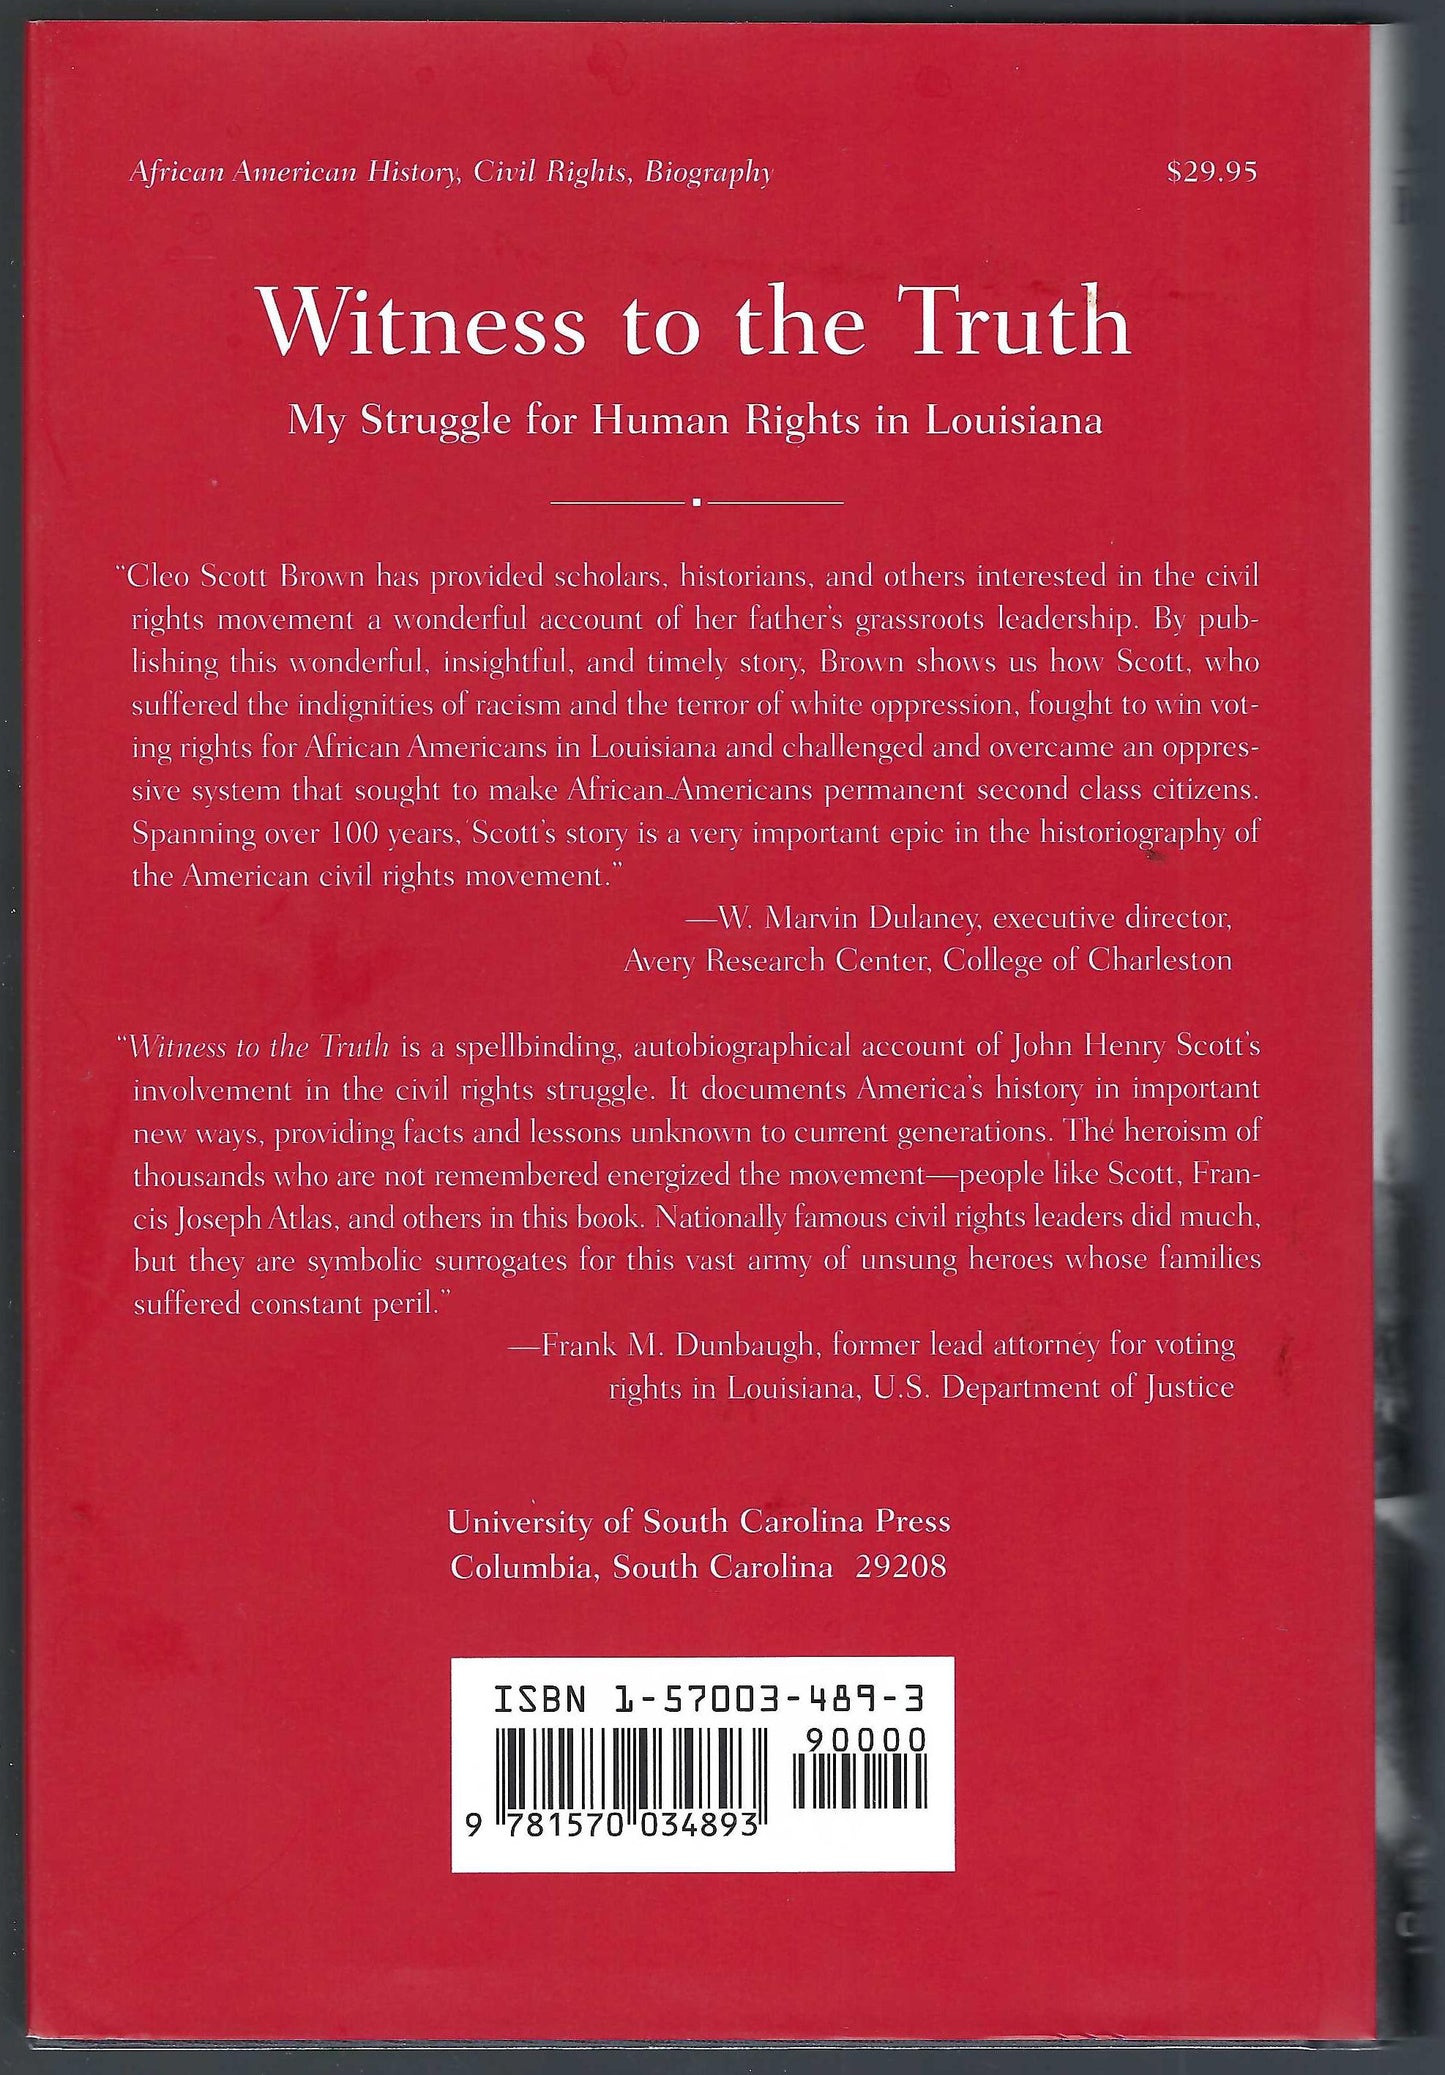 Witness to the Truth back cover